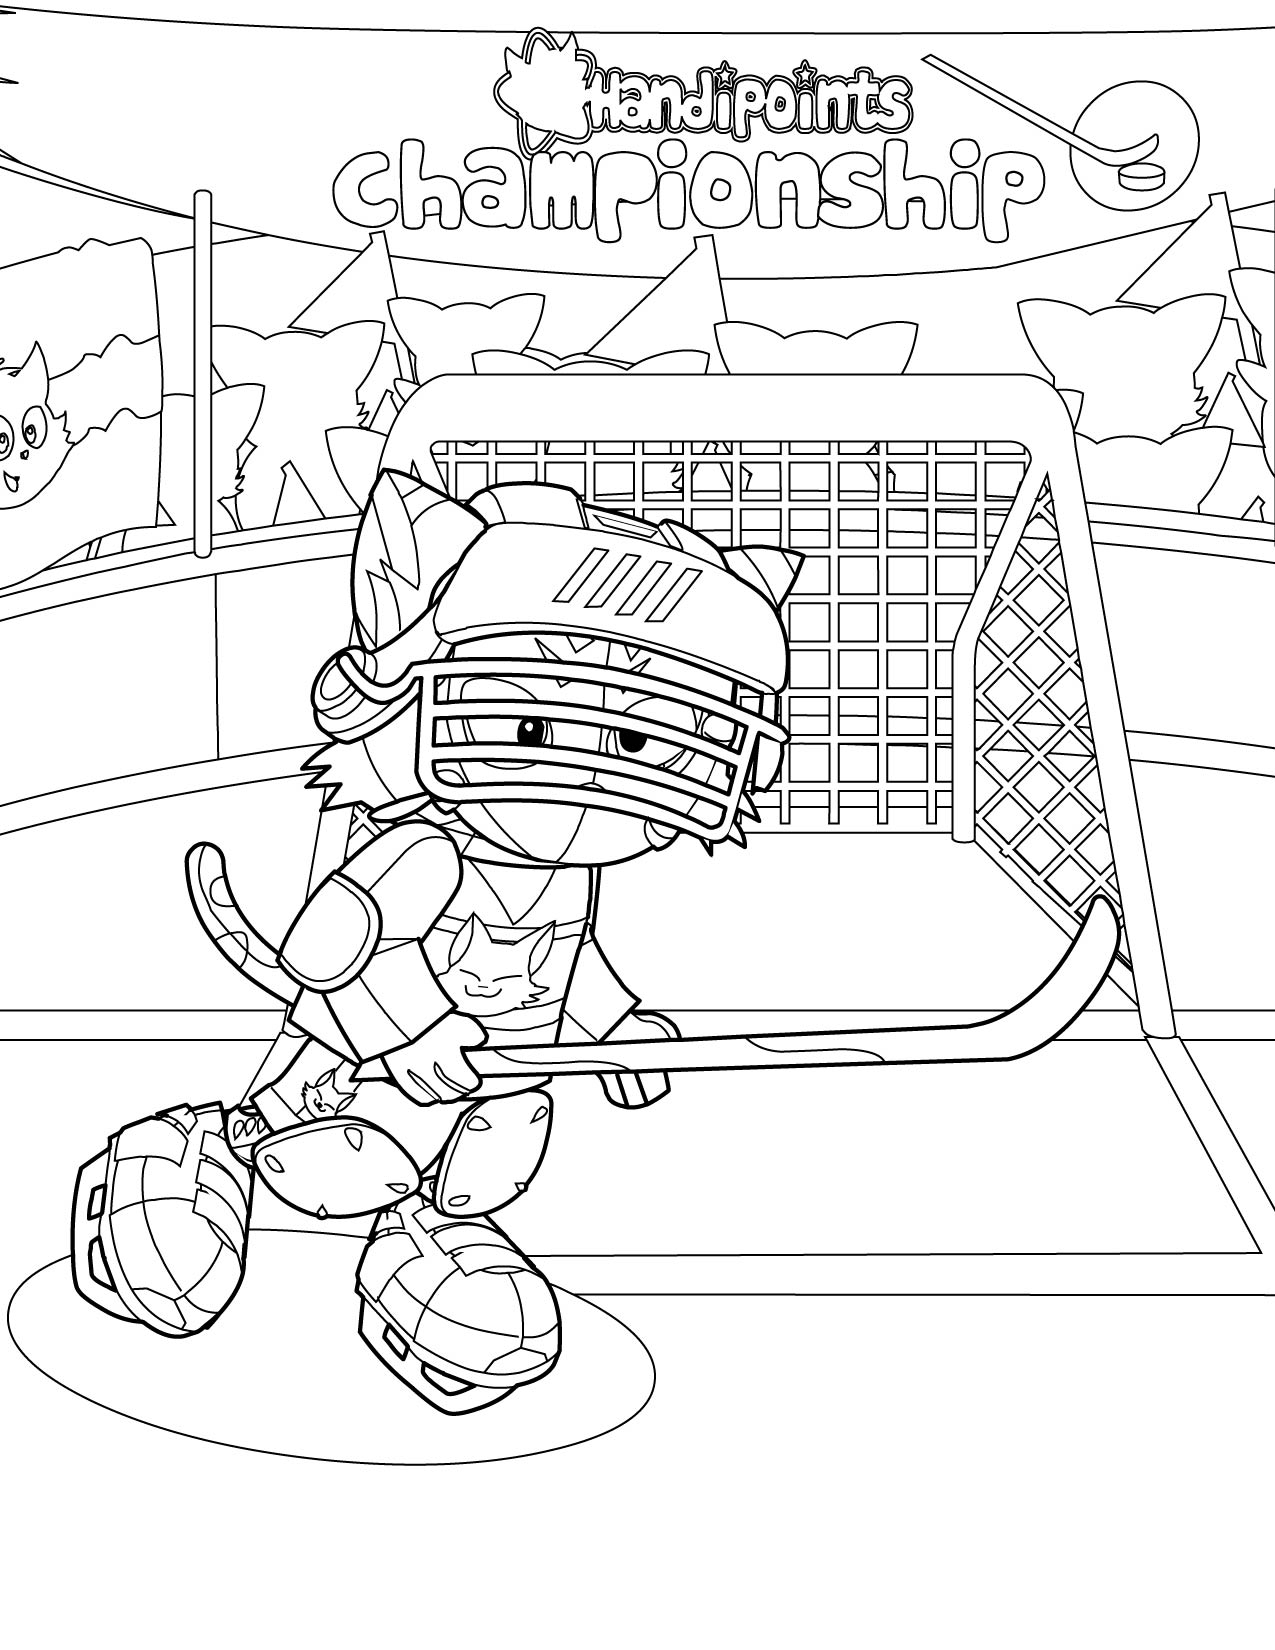 Hockey Skate Coloring Page at GetColorings.com | Free ...